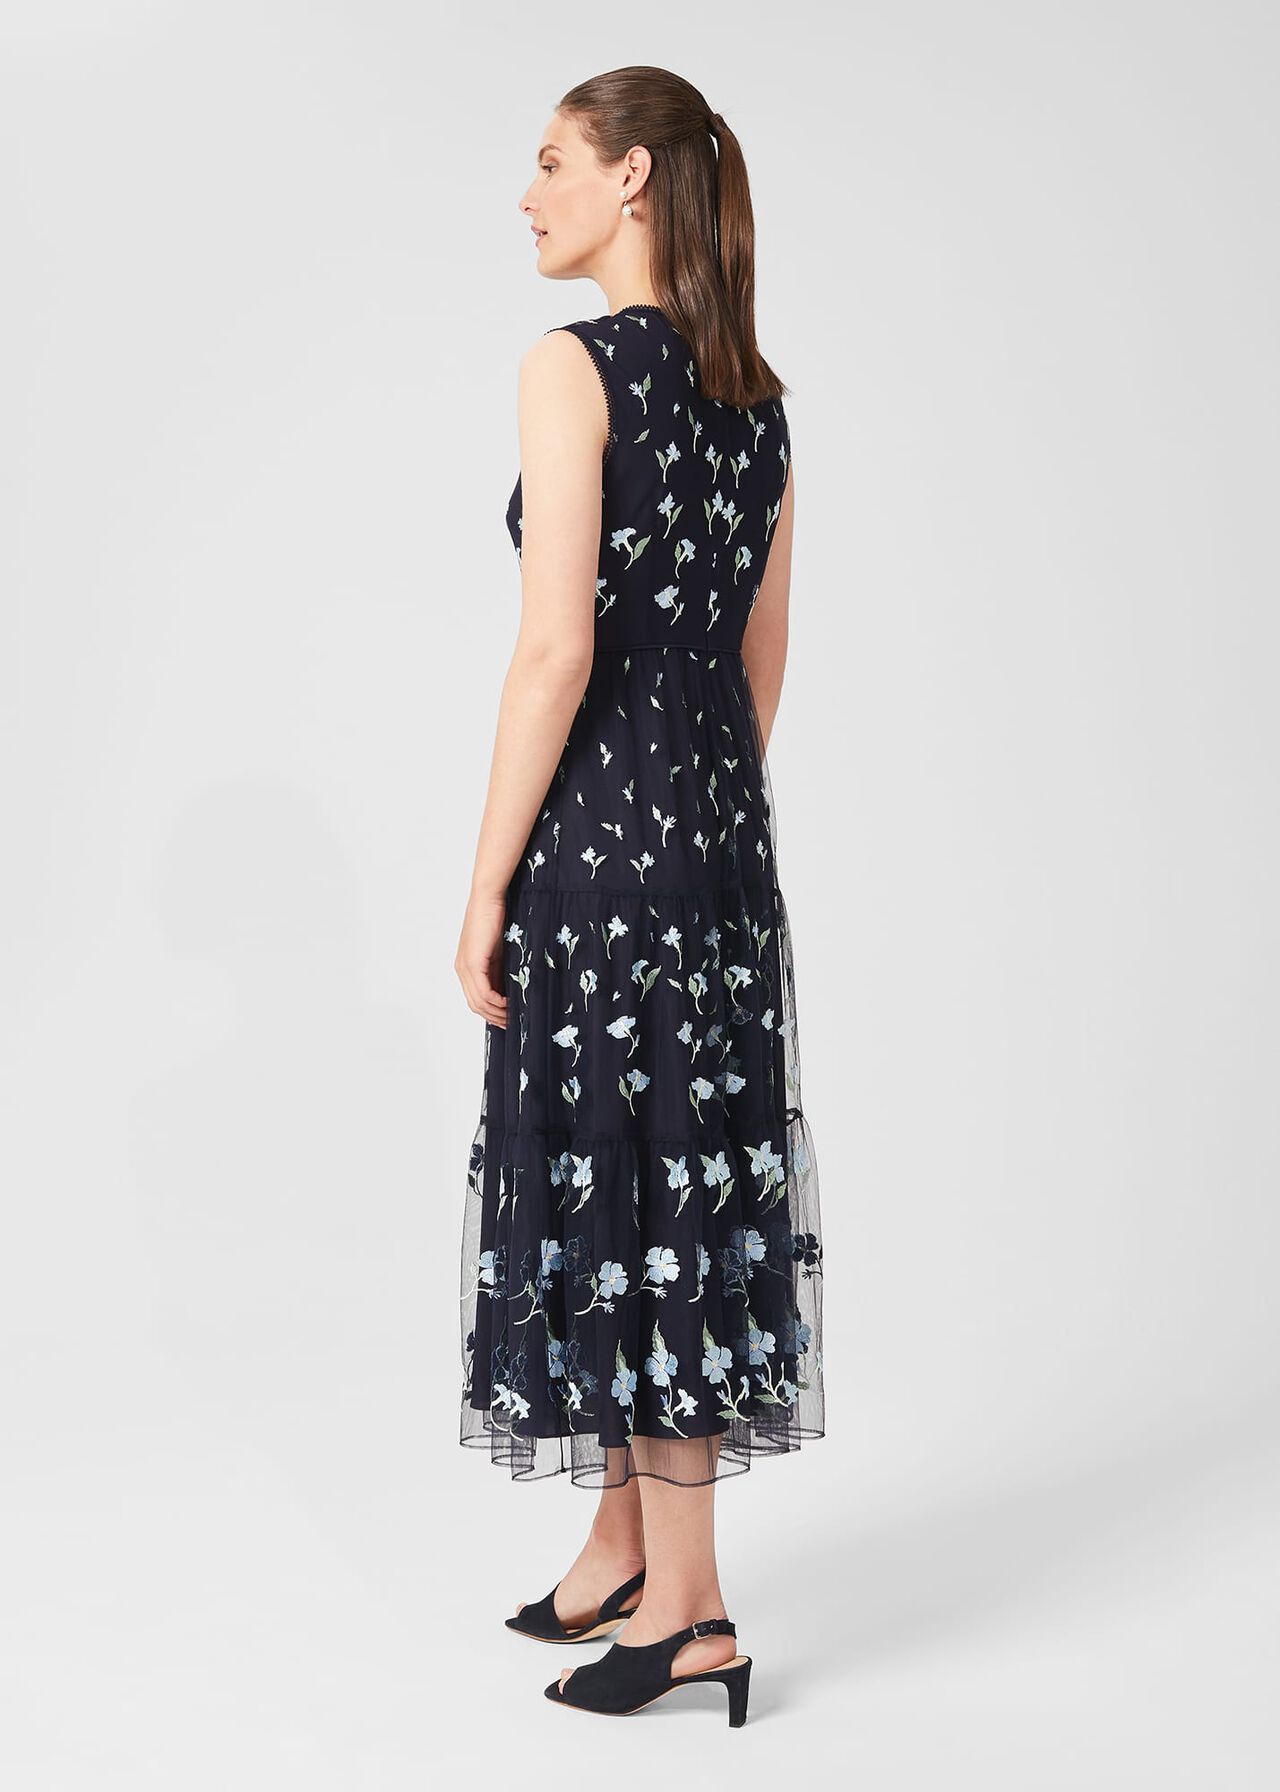 Petite Bethany Embroidered Floral Dress, Navy Multi, hi-res